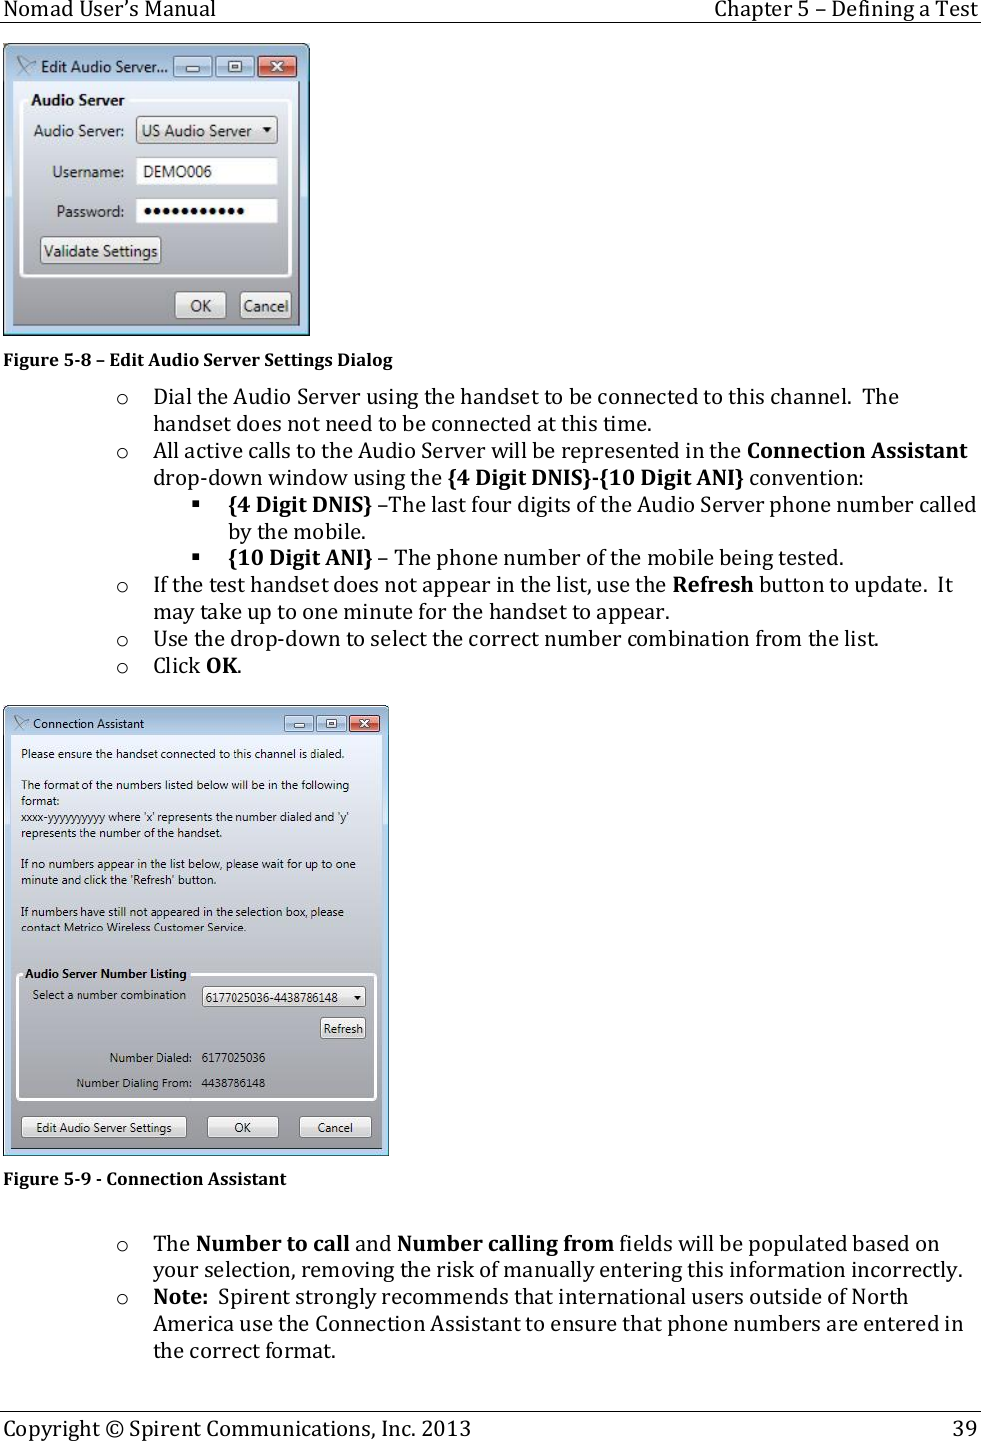  Nomad User’s Manual  Chapter 5 – Defining a Test Copyright © Spirent Communications, Inc. 2013    39   Figure 5-8 – Edit Audio Server Settings Dialog o Dial the Audio Server using the handset to be connected to this channel.  The handset does not need to be connected at this time. o All active calls to the Audio Server will be represented in the Connection Assistant drop-down window using the {4 Digit DNIS}-{10 Digit ANI} convention:  {4 Digit DNIS} –The last four digits of the Audio Server phone number called by the mobile.  {10 Digit ANI} – The phone number of the mobile being tested. o If the test handset does not appear in the list, use the Refresh button to update.  It may take up to one minute for the handset to appear. o Use the drop-down to select the correct number combination from the list. o Click OK.   Figure 5-9 - Connection Assistant  o The Number to call and Number calling from fields will be populated based on your selection, removing the risk of manually entering this information incorrectly. o Note:  Spirent strongly recommends that international users outside of North America use the Connection Assistant to ensure that phone numbers are entered in the correct format.  